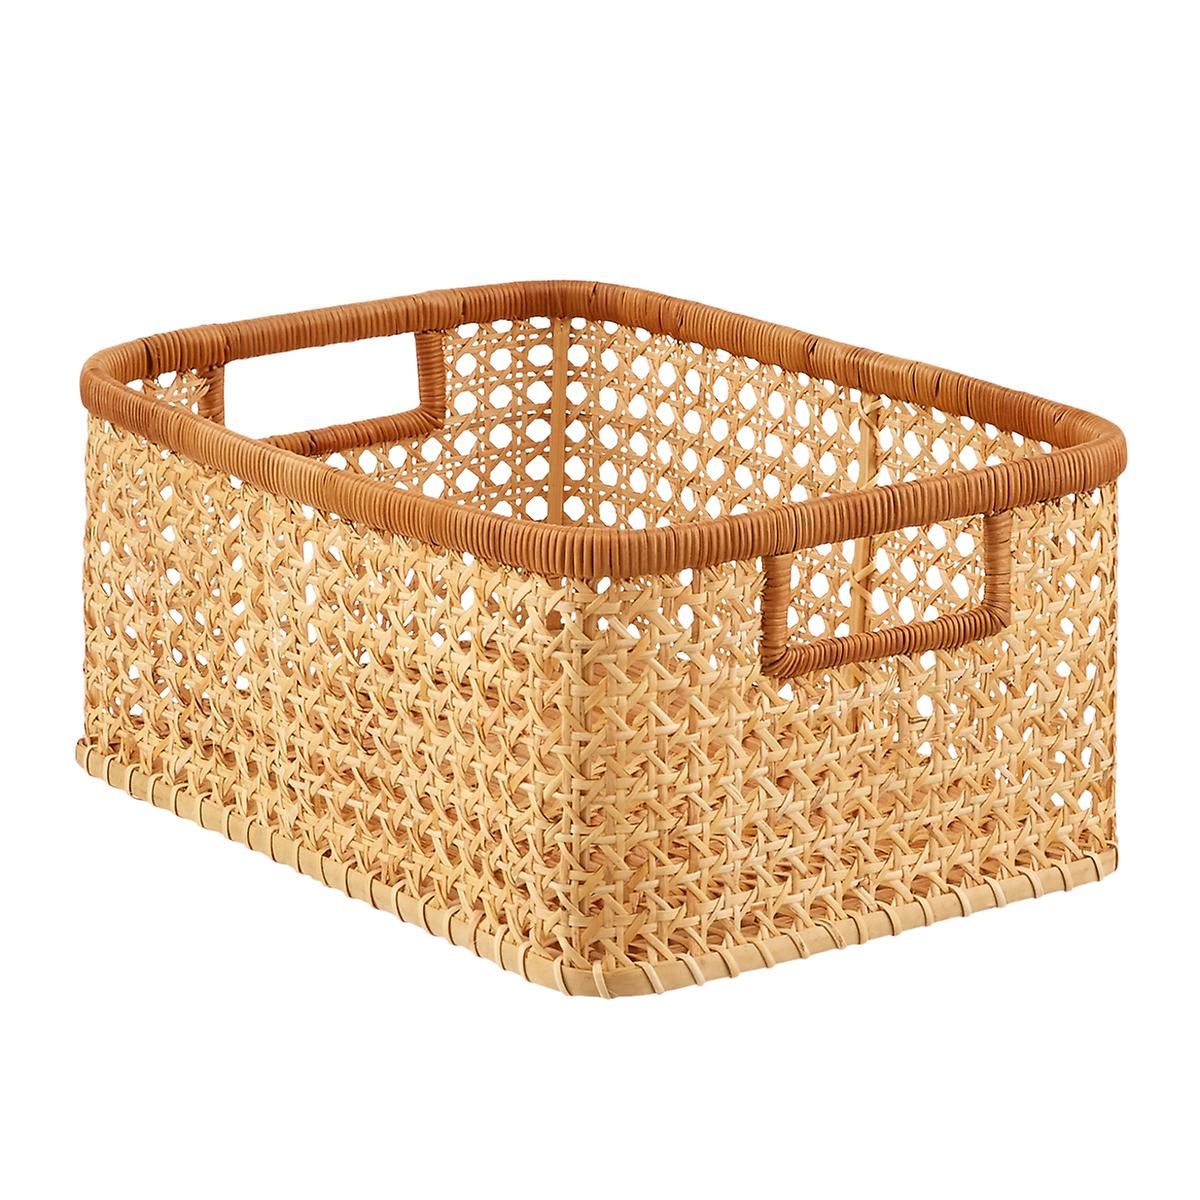 Large Albany Cane Rattan Bin | The Container Store